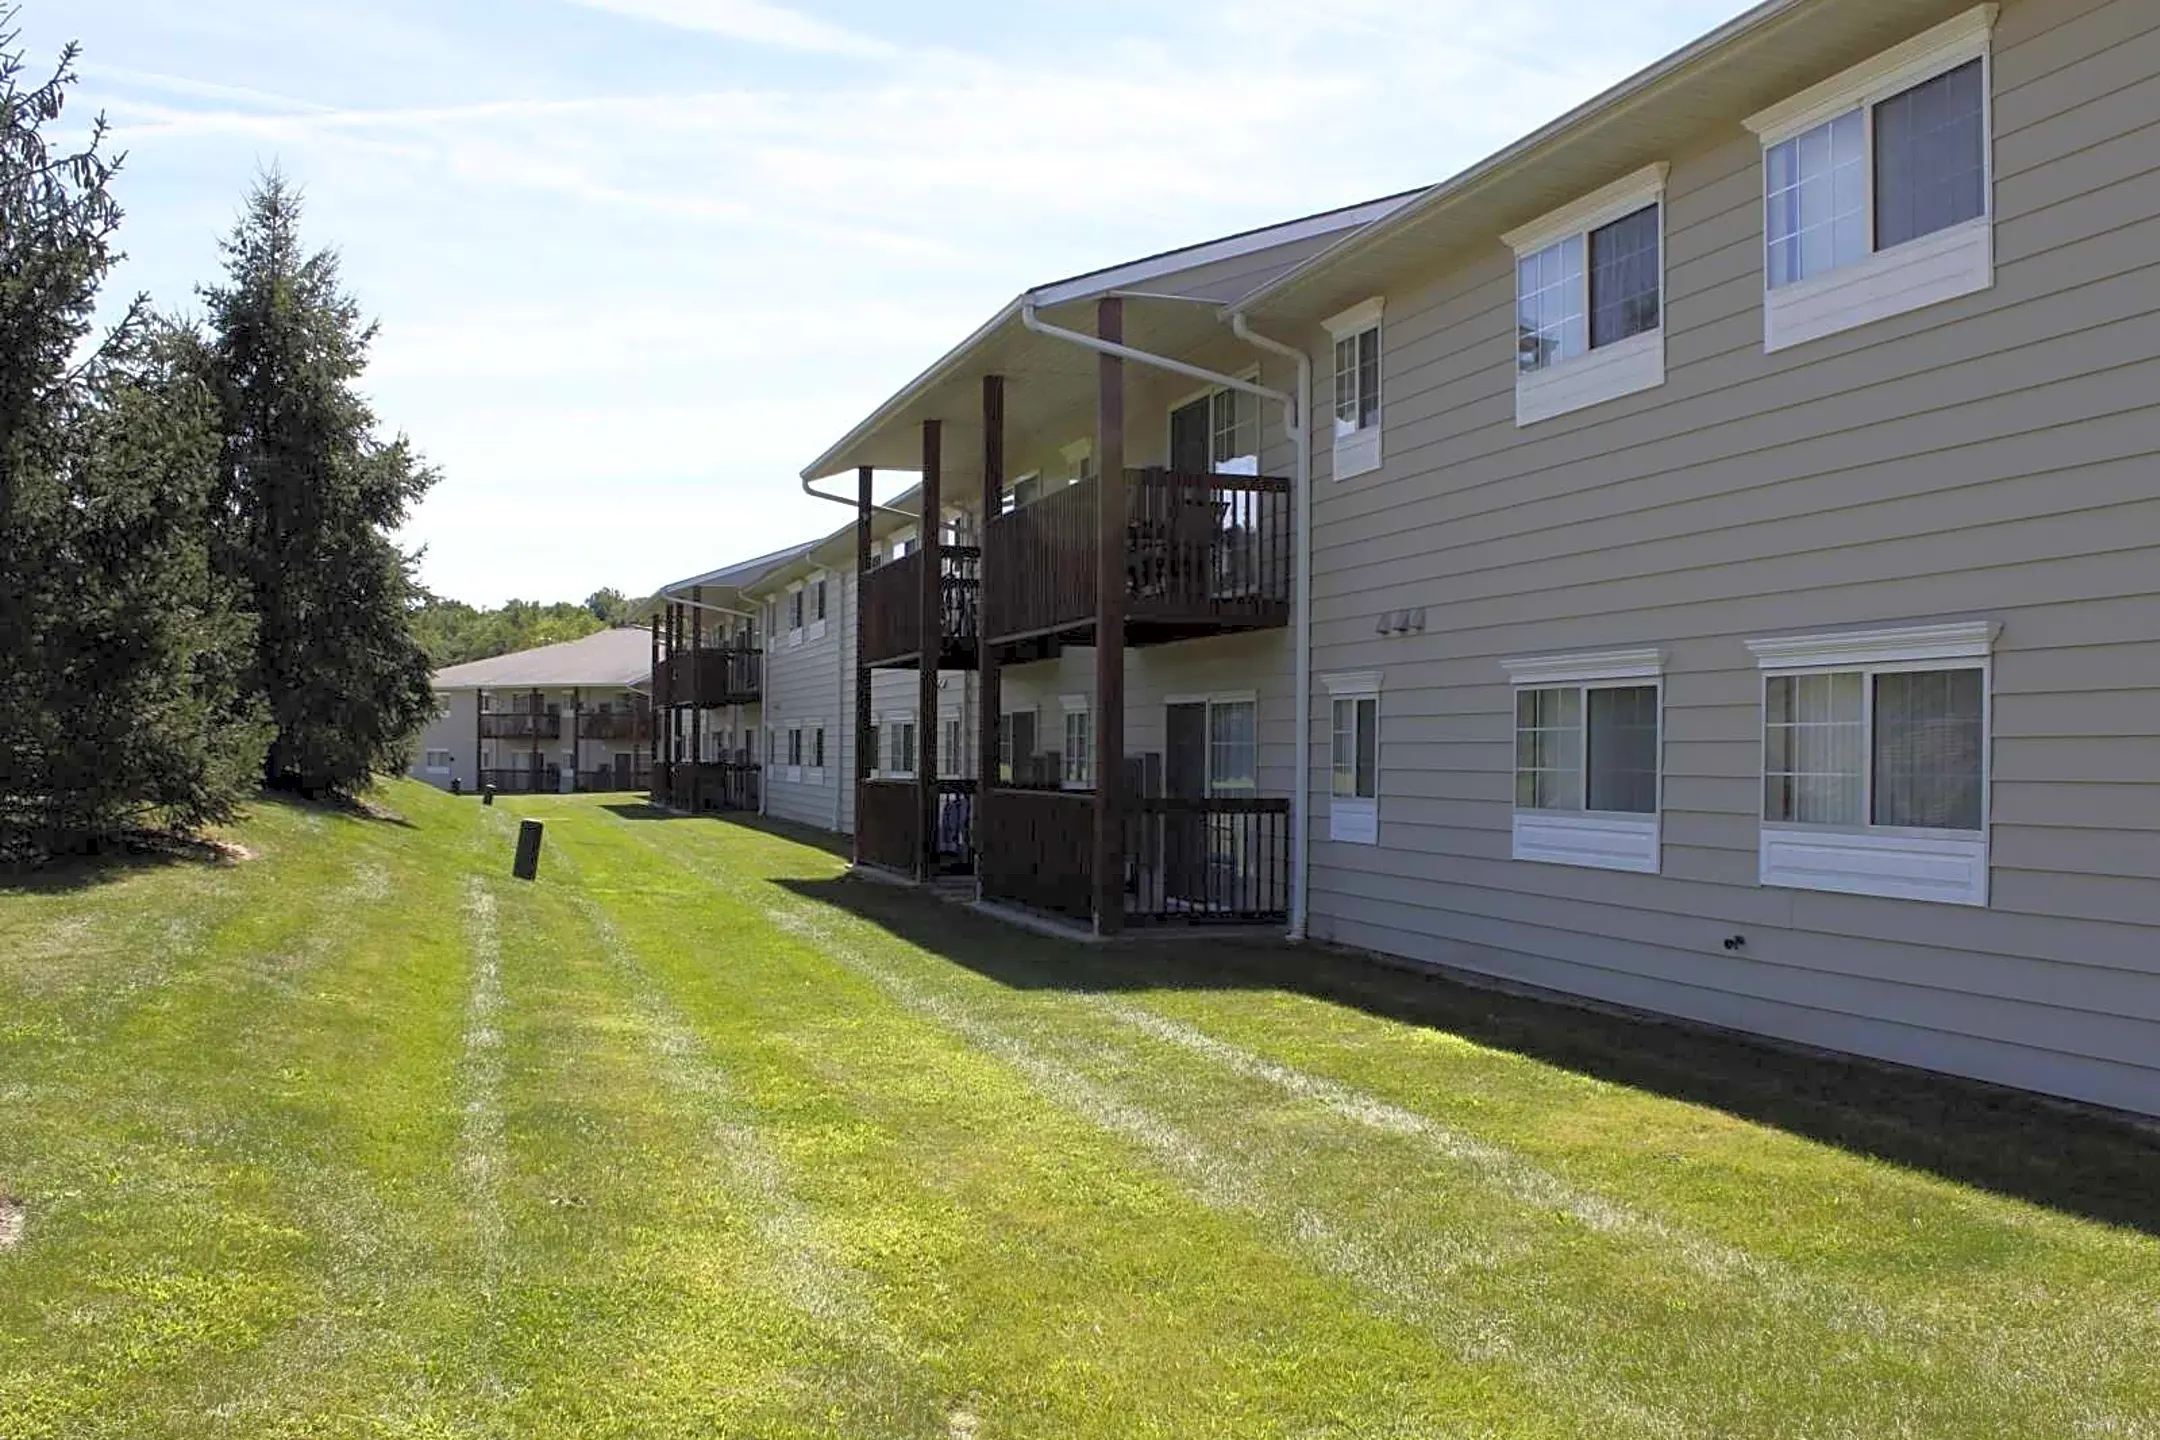 Glenwood Pointe Apartments - Twinsburg, OH